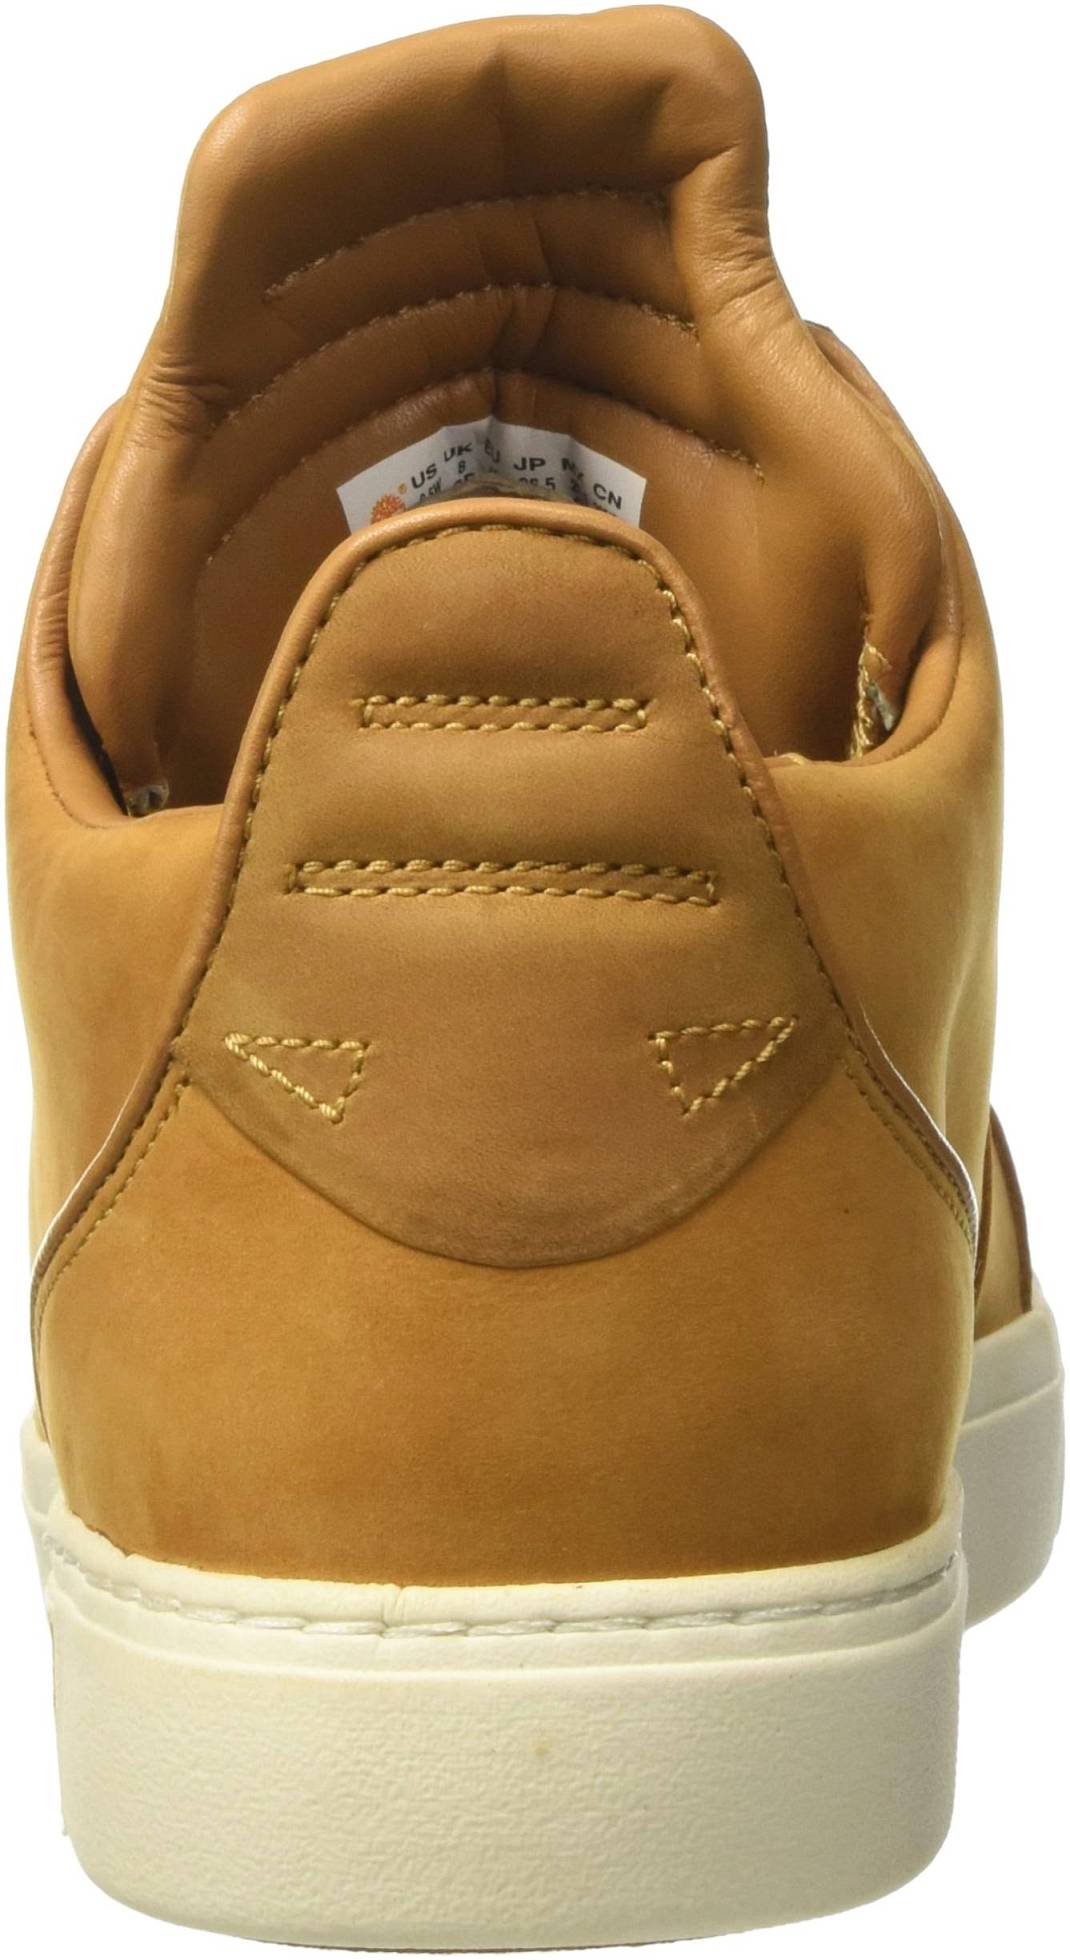 Timberland Amherst High-Top Chukka – Shoes Reviews & Reasons To Buy